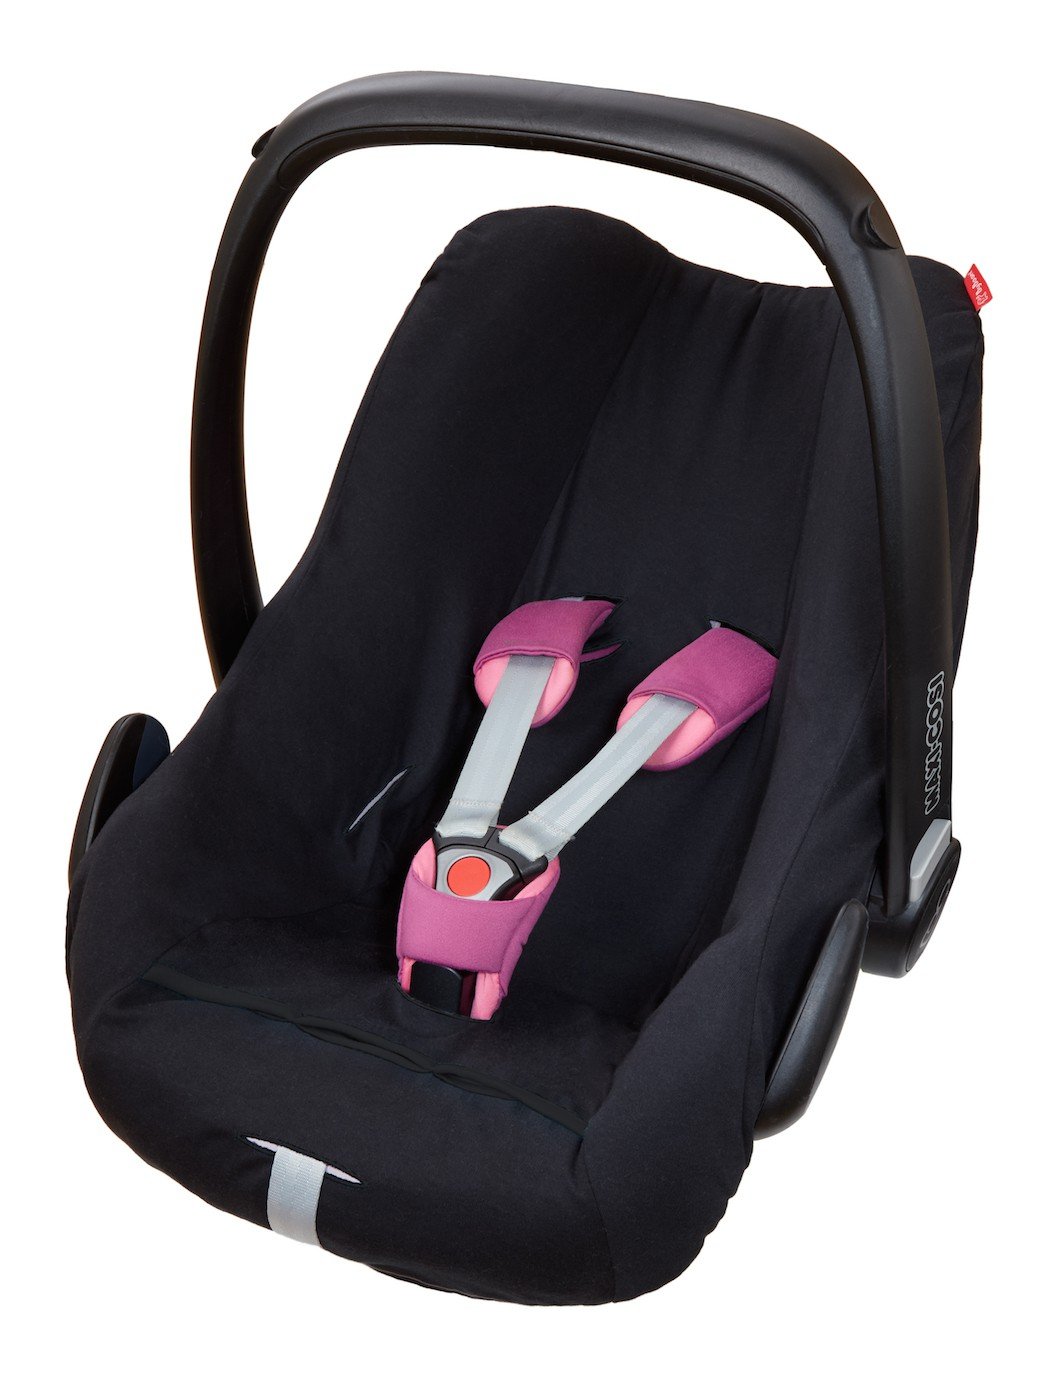 ByBoom – 100% cotton, summer cover, universal cover for baby seat, car seat e.g Maxi Cosi CabrioFix, City, Pebble. Designed in Germany. Made in the EU.